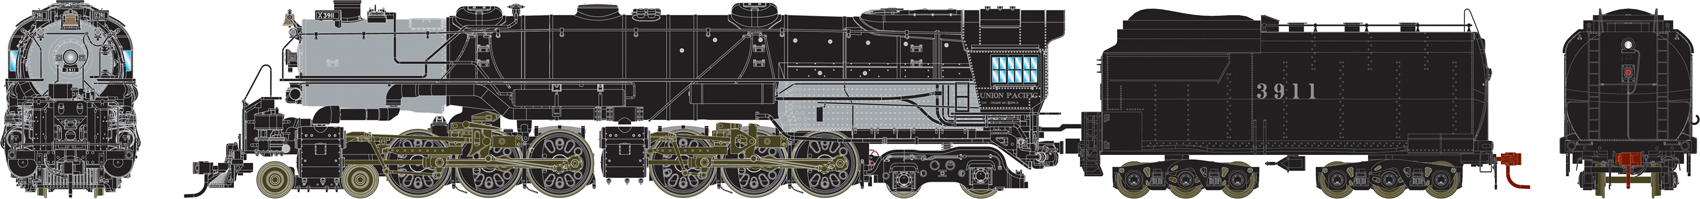 A black model locomotive seen from front, rear and side view